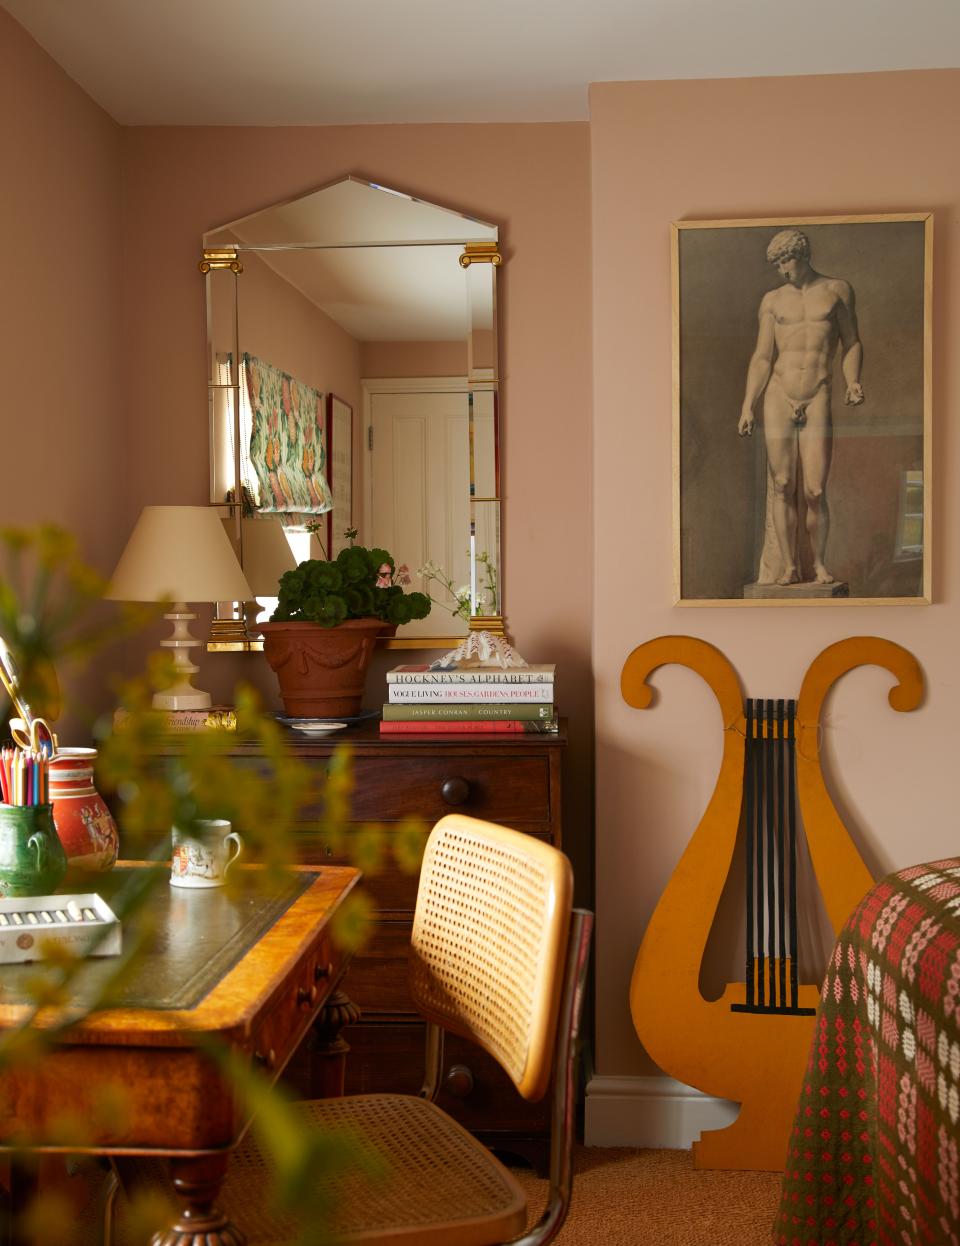 The lyres (one shown) in the pink bedroom once graced a fairground; victorian desk, Marcel Breuer chair.